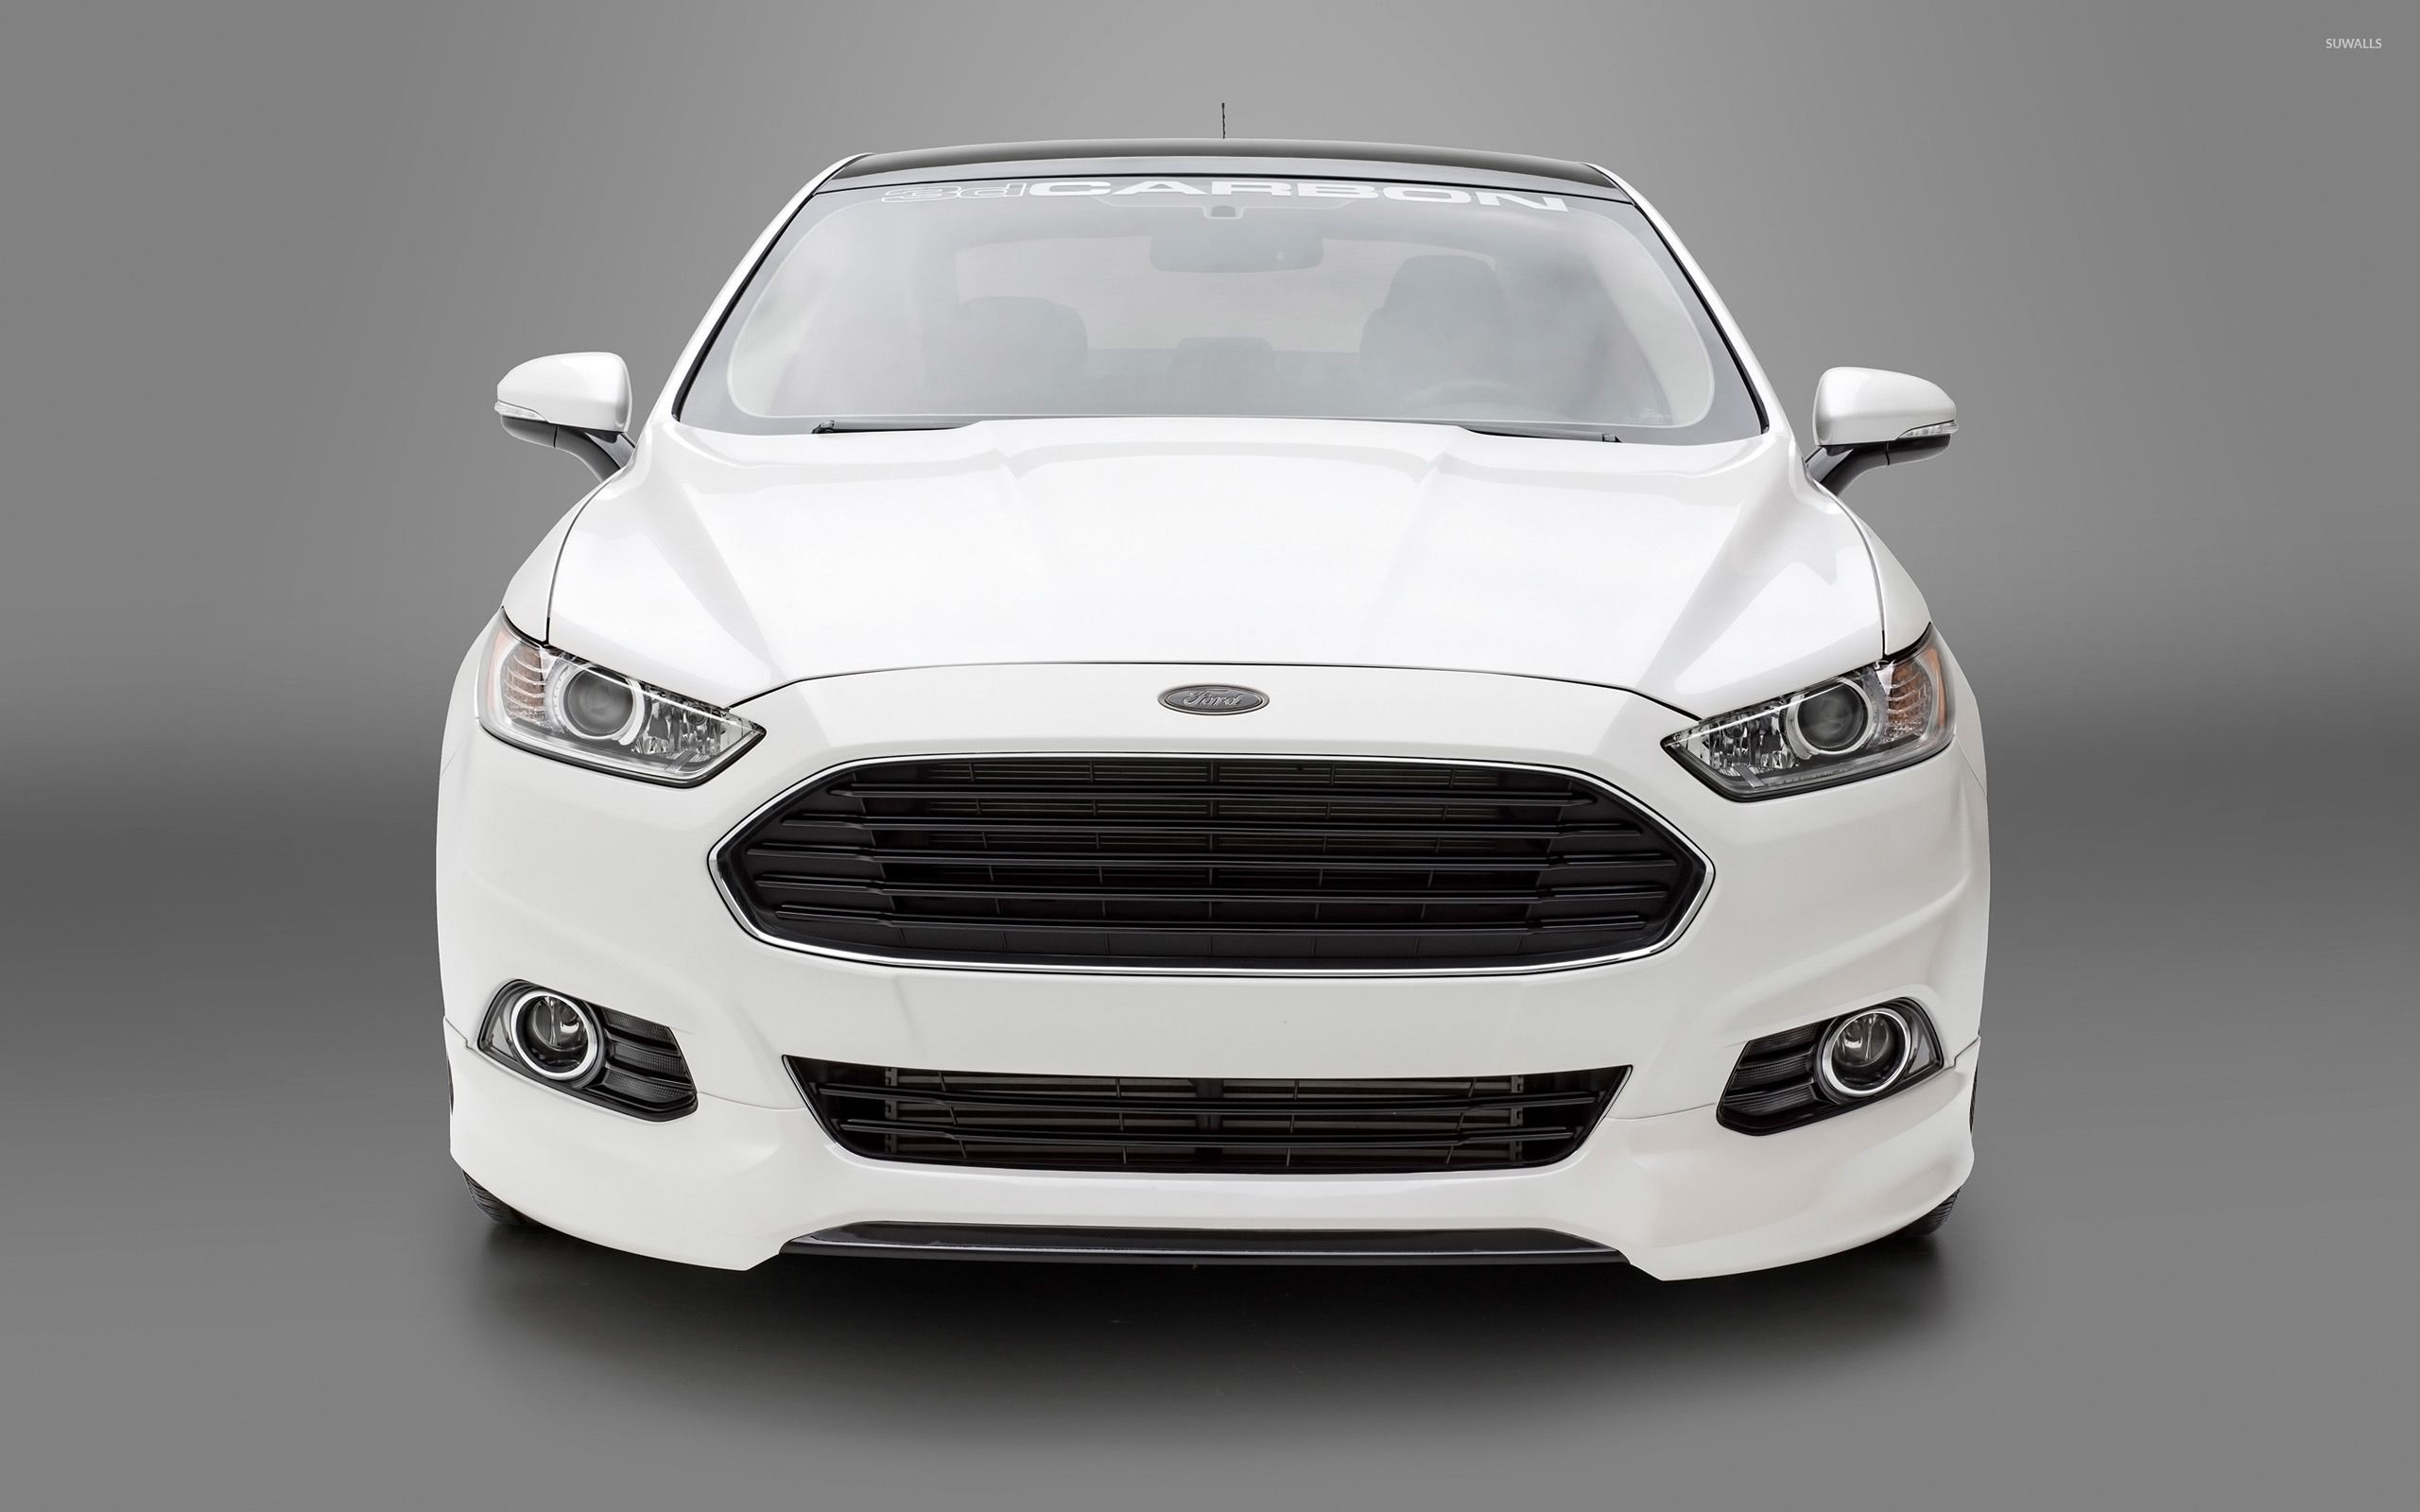 2013 Ford Fusion Wallpapers on WallpaperDog